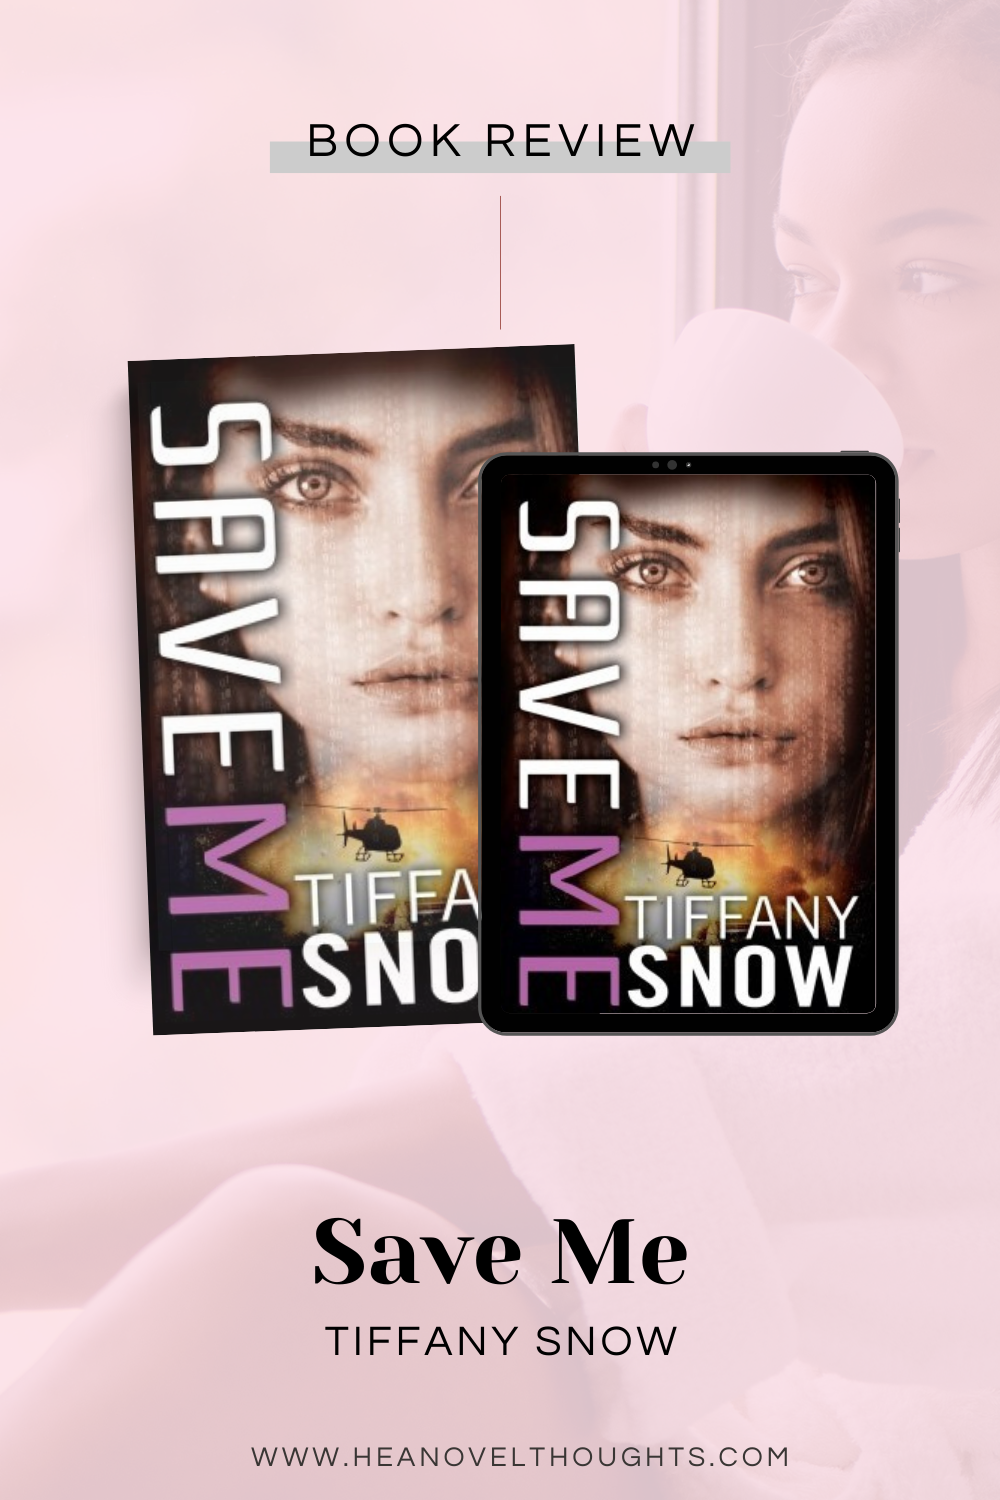 Save Me by Tiffany Snow